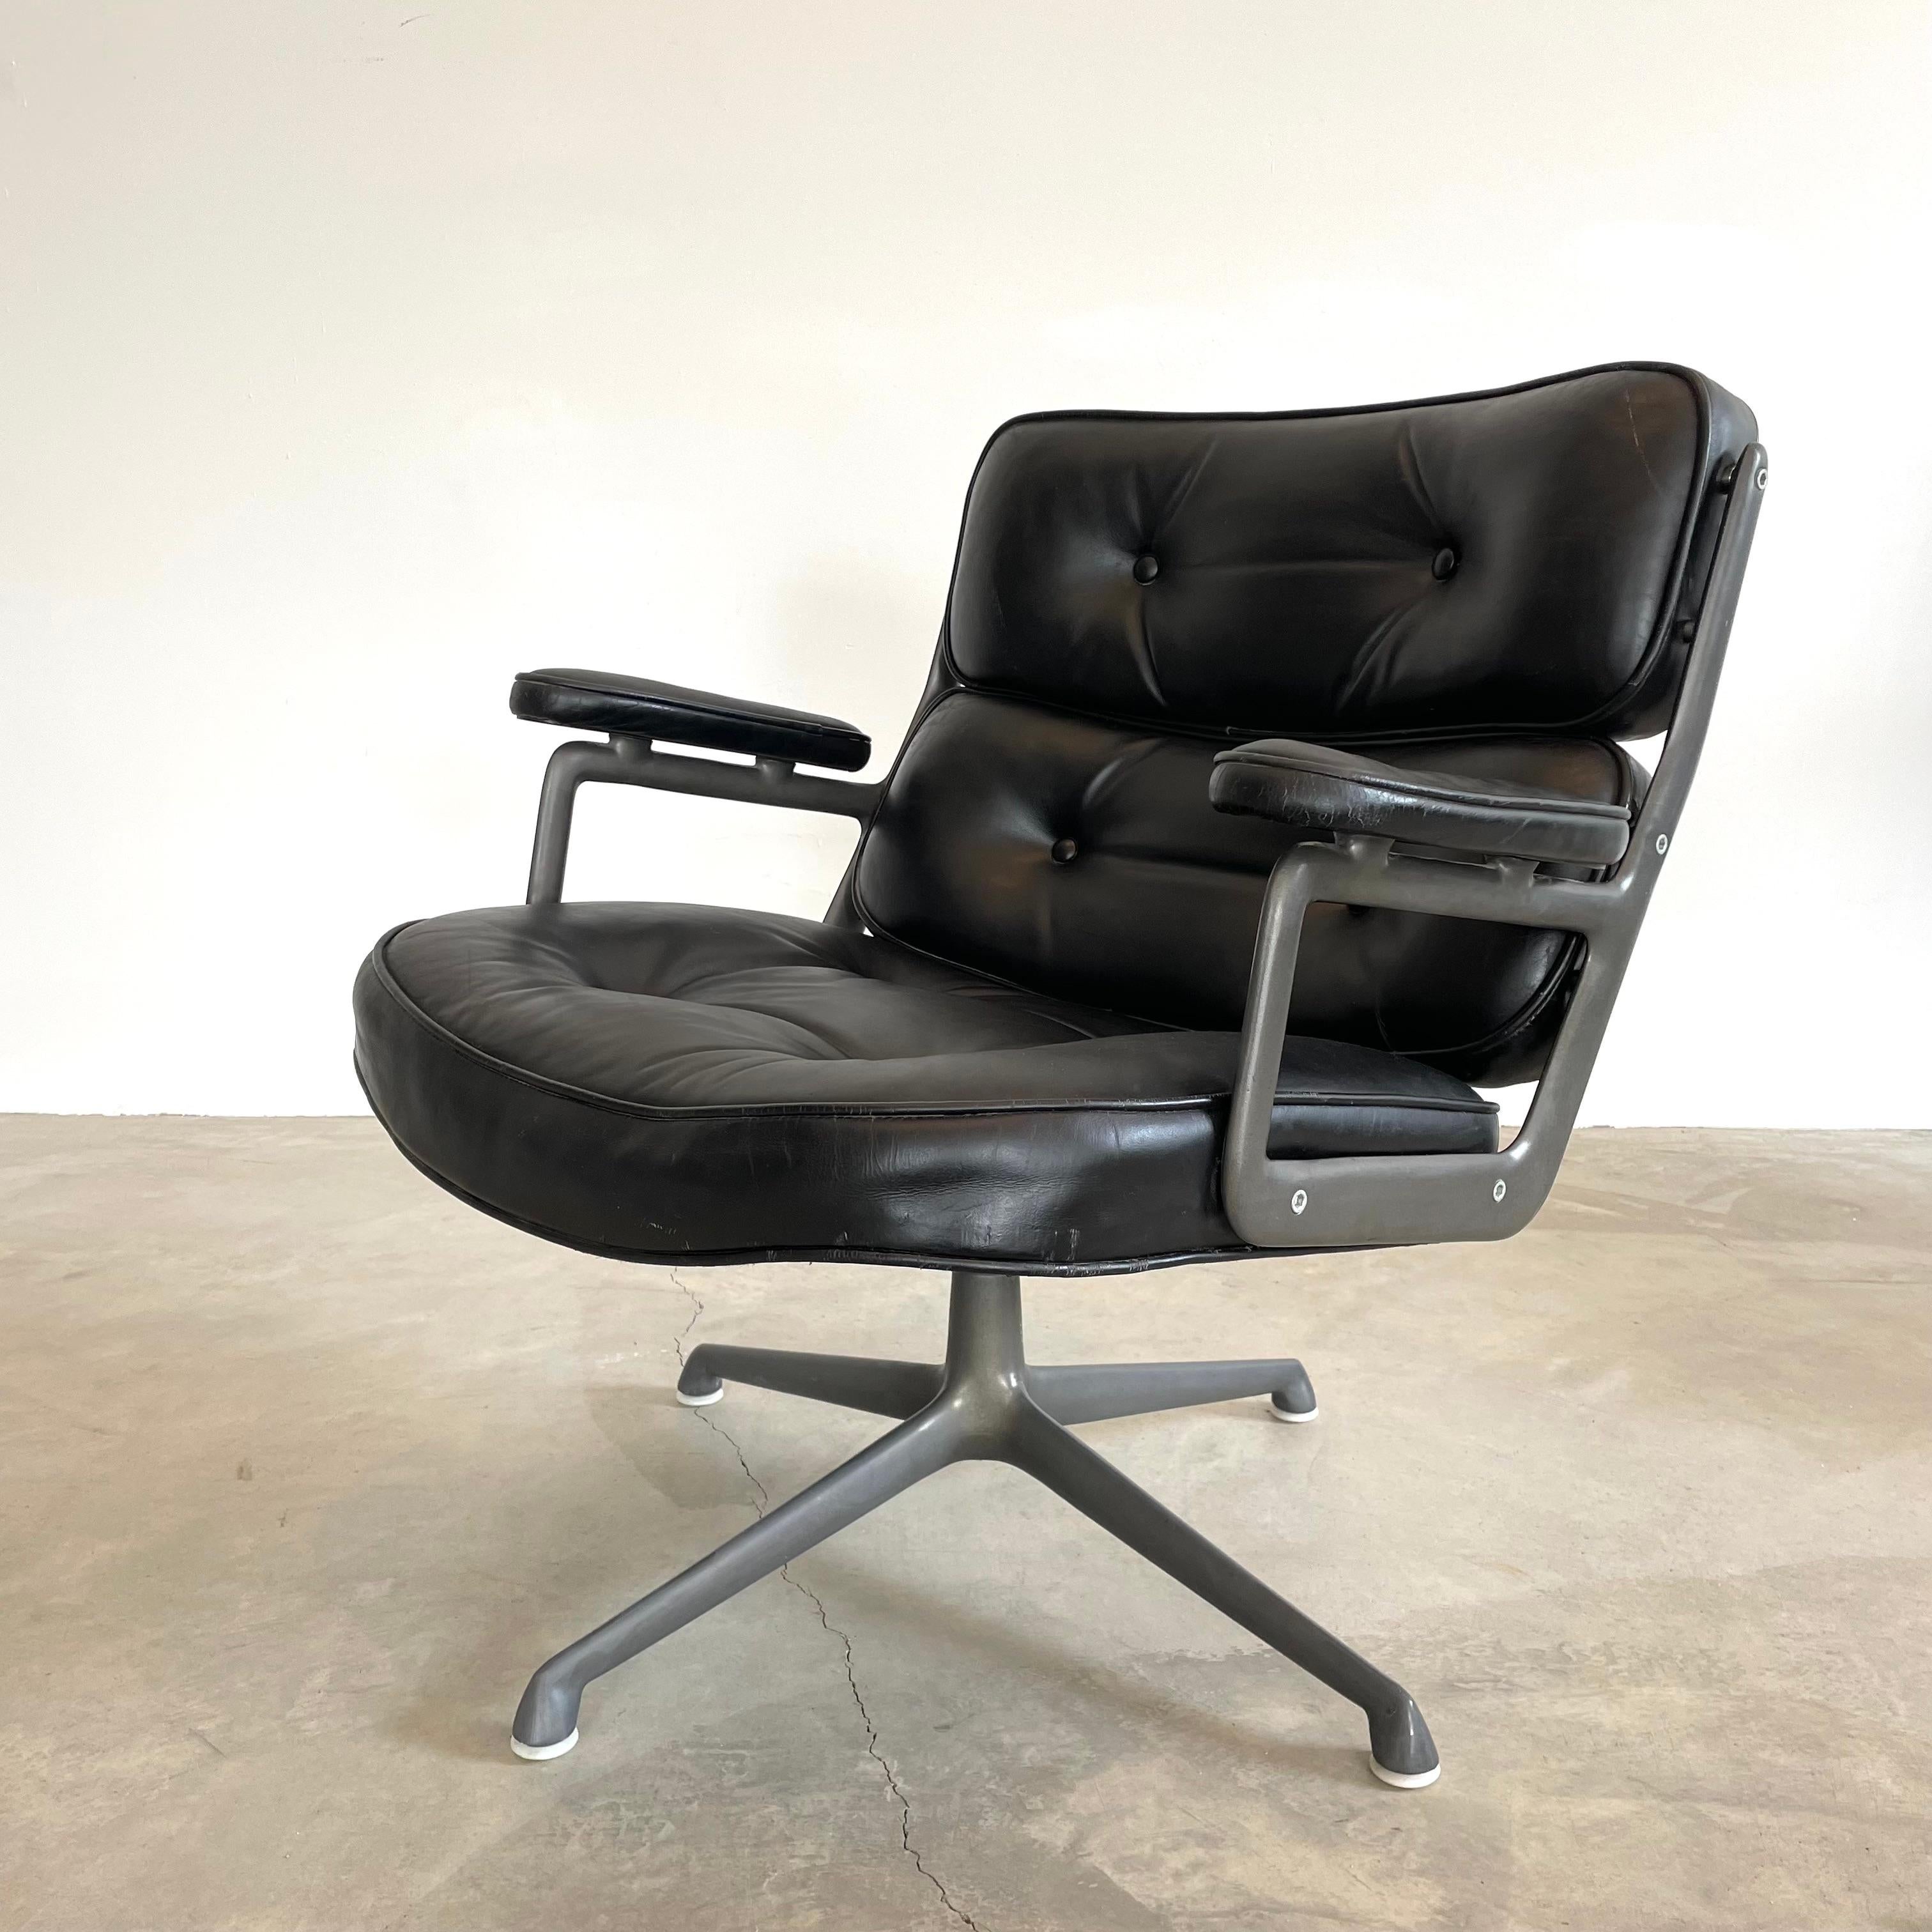 Eames Time Life Lobby Lounge Chair in Black Leather for Herman Miller, 1980s USA For Sale 1